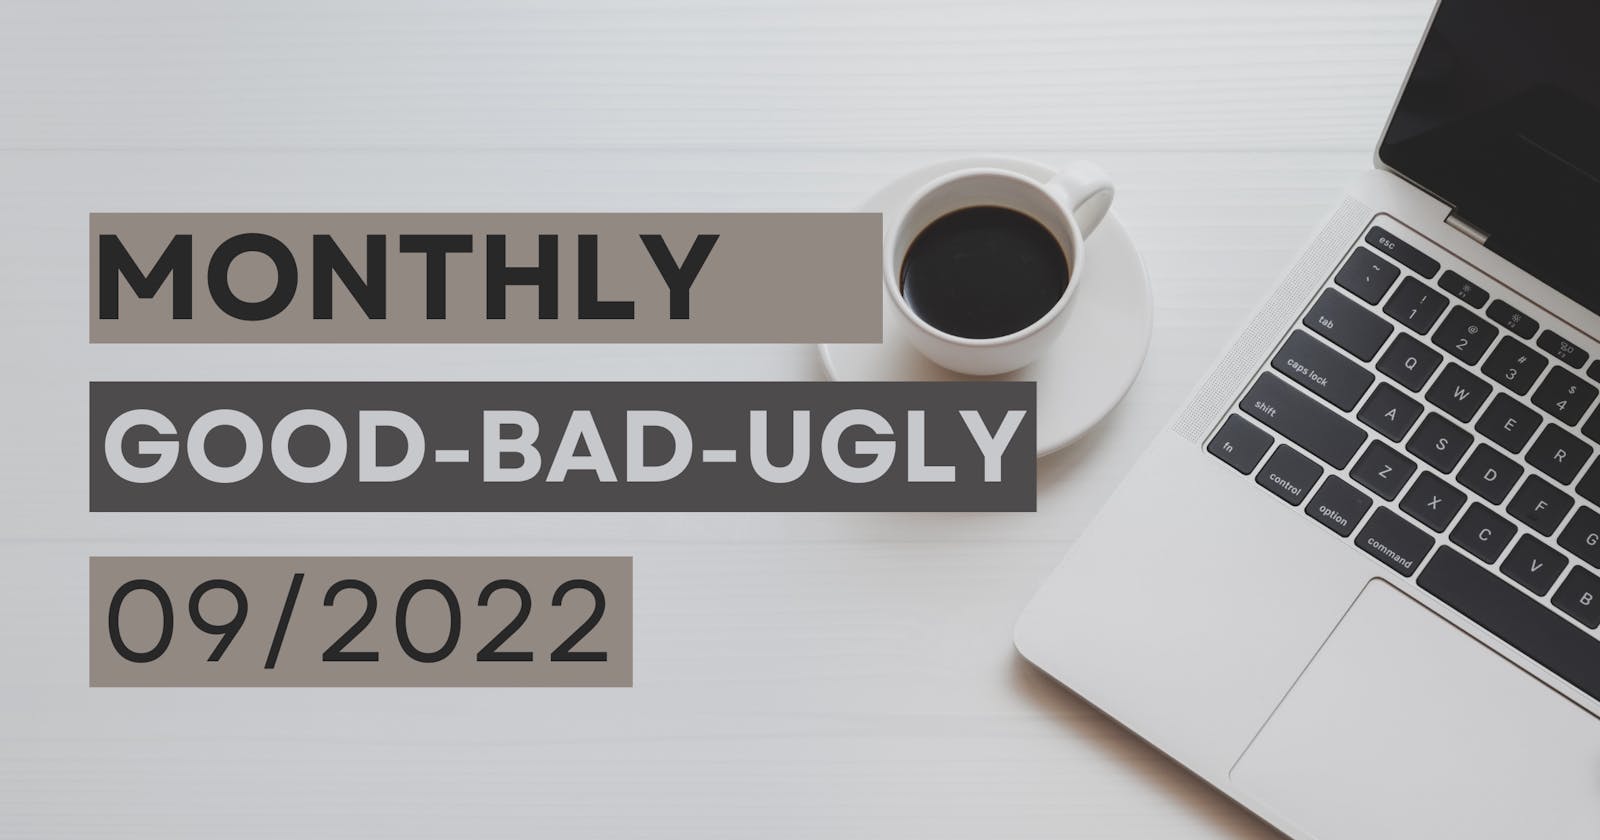 Monthly Good-Bad-Ugly